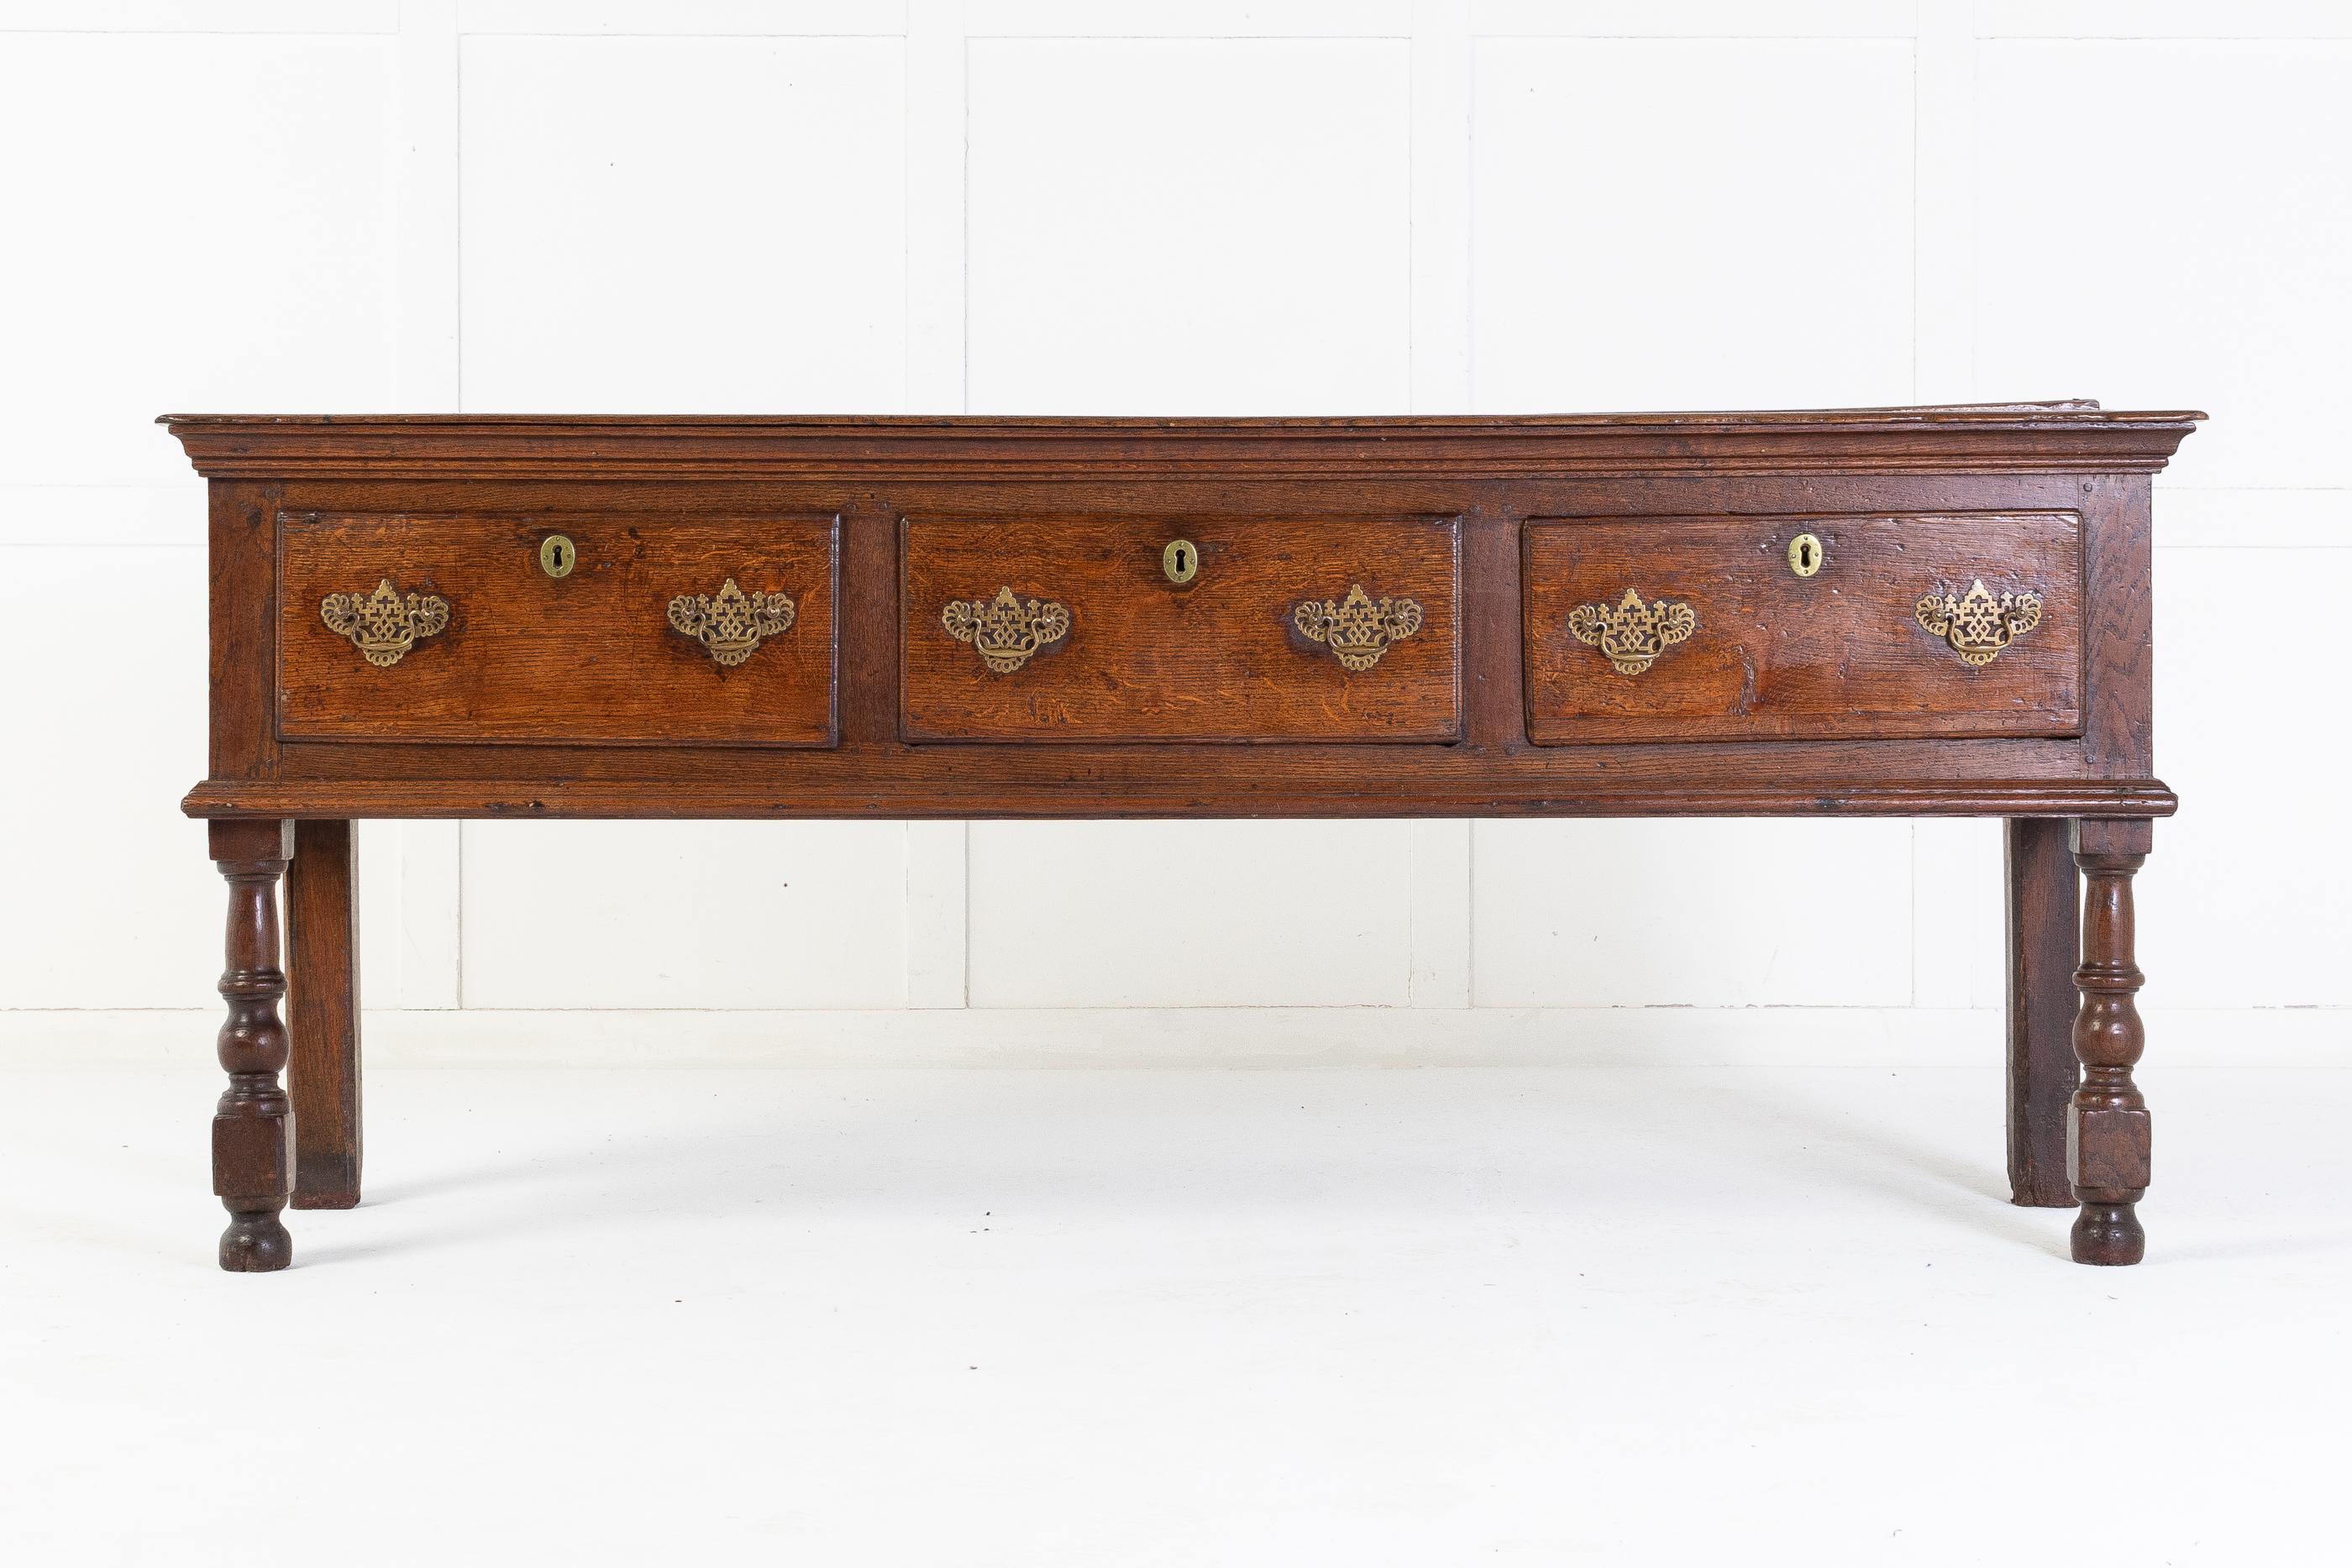 Early 18th century oak dresser base with baluster leg. Having three deep drawers with brass handles and escutcheons.

The top, has two good wide planks of oak and stands on well turned front legs. Deep moulded edges under the top and around the